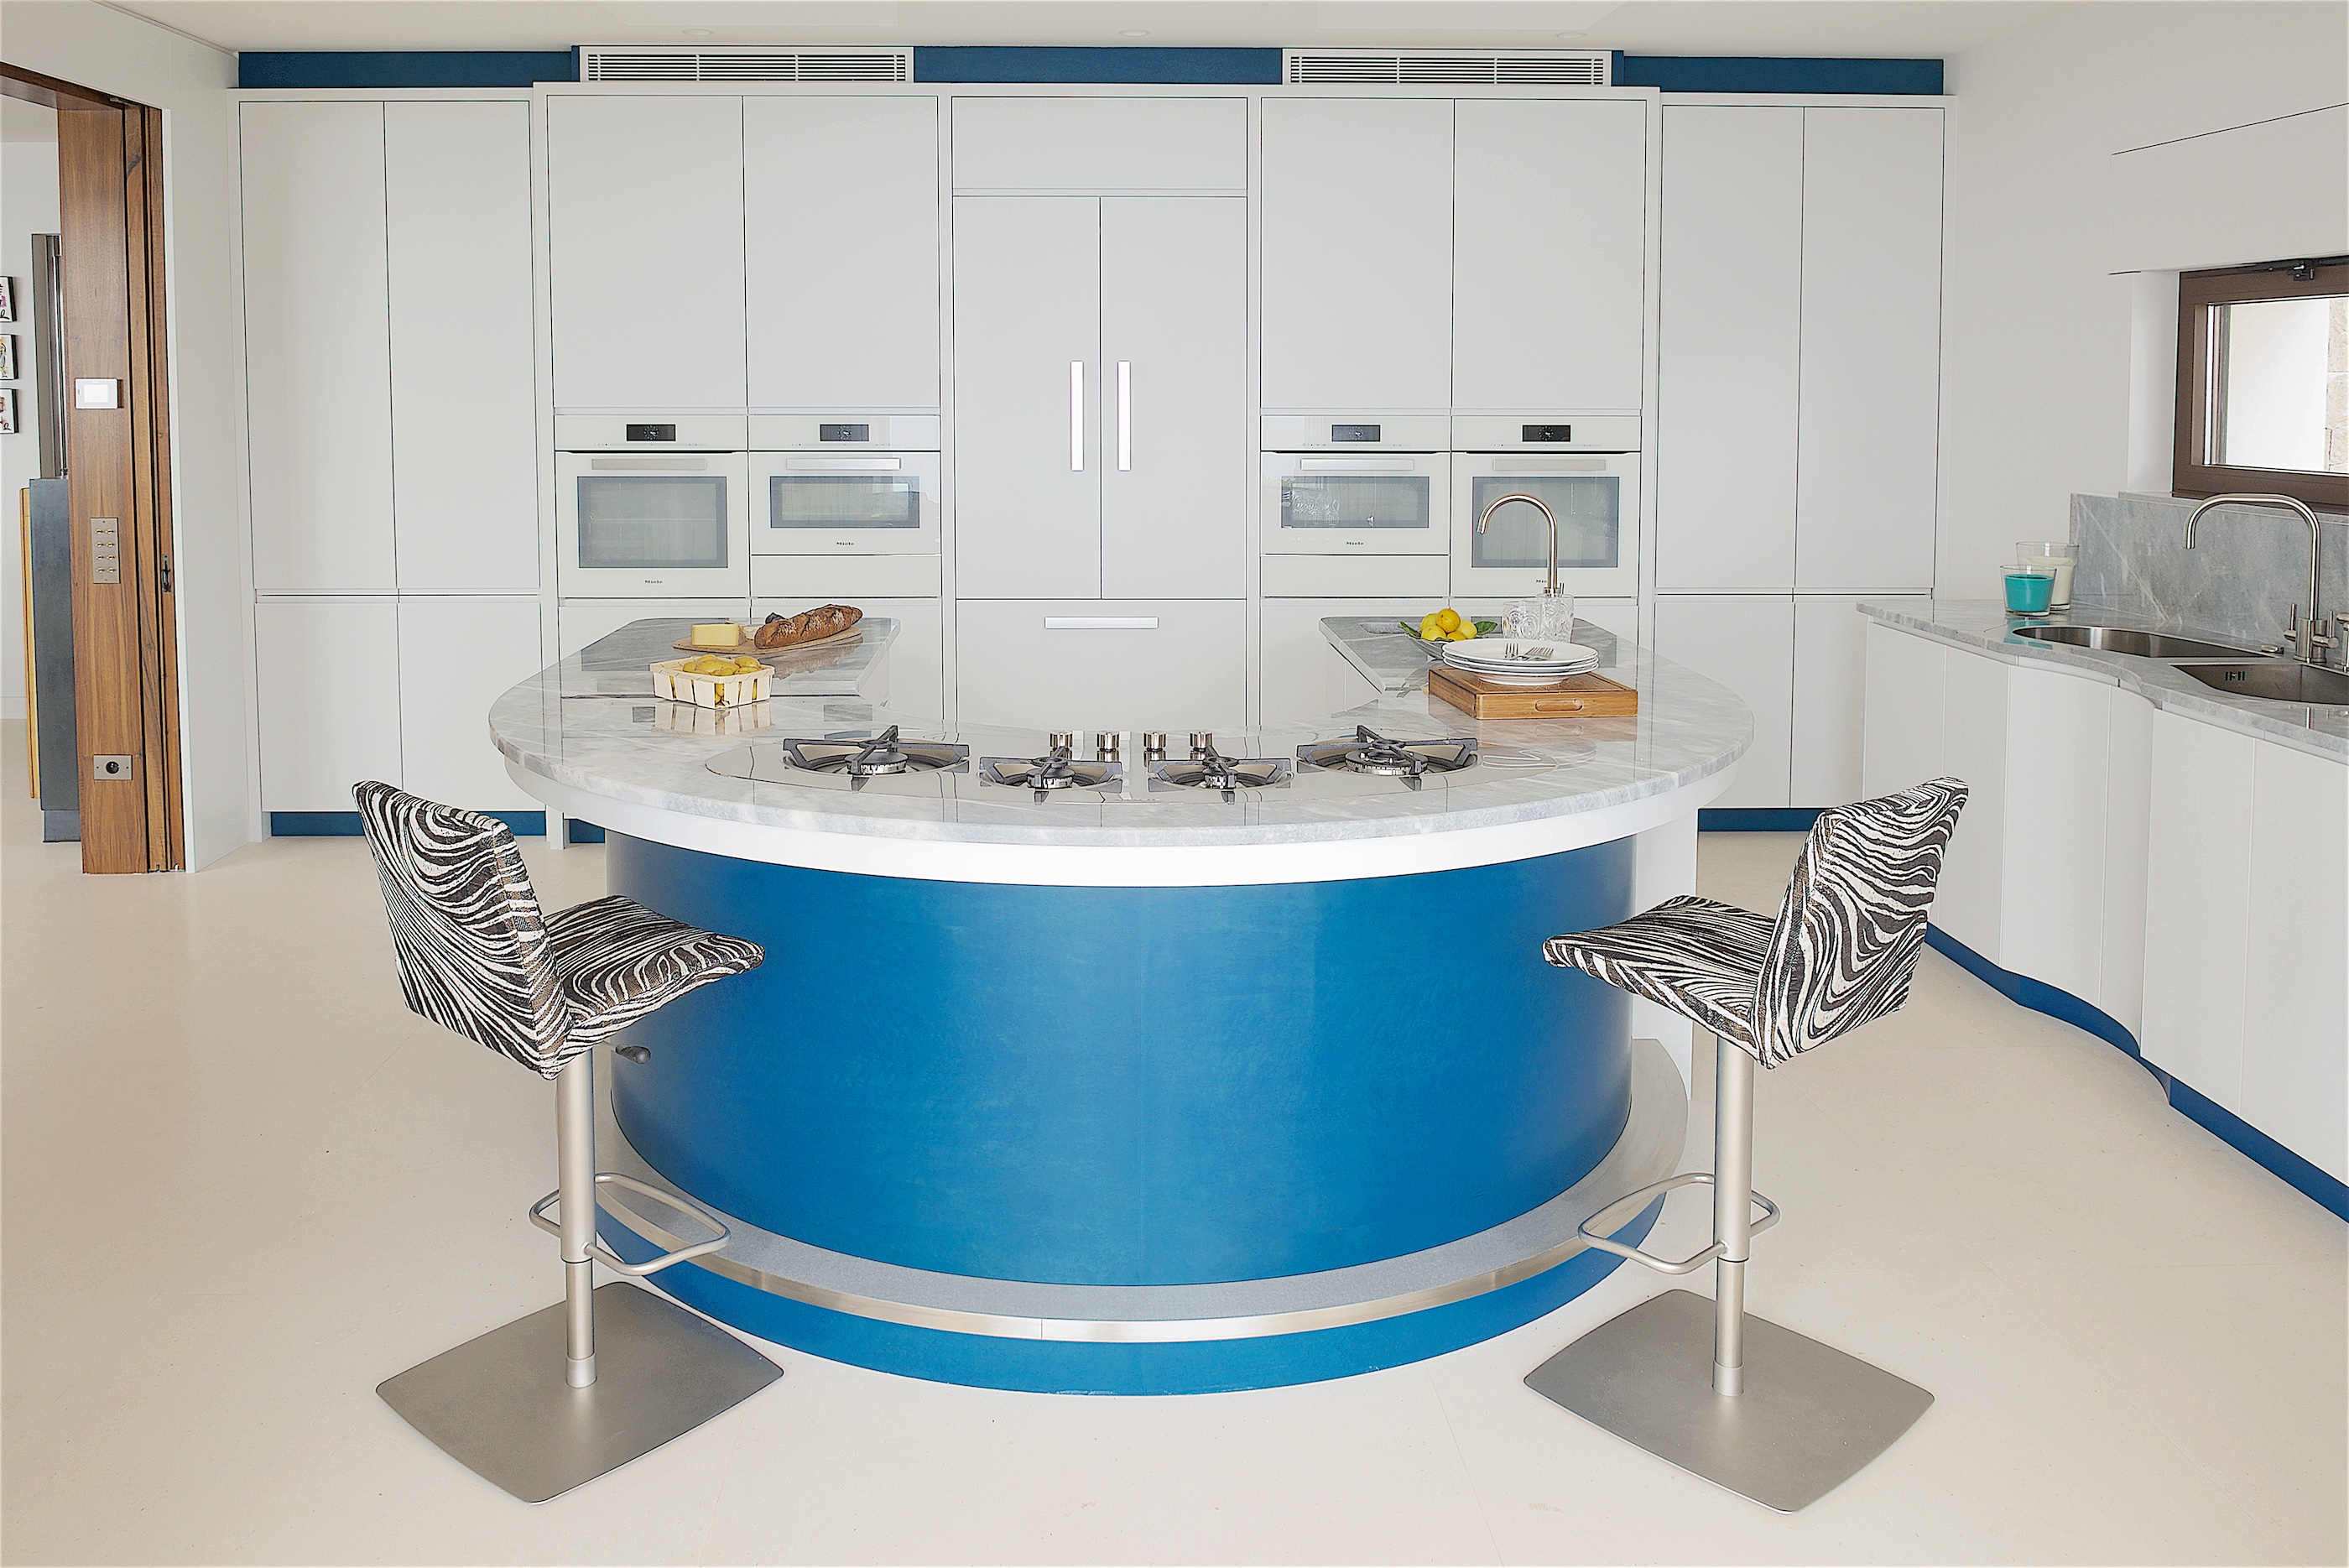 Contemporary blue curved kitchen island with Barazza Tao hob and zebra print kitchen stools with white kitchen cabinets and under cabinet lighting.